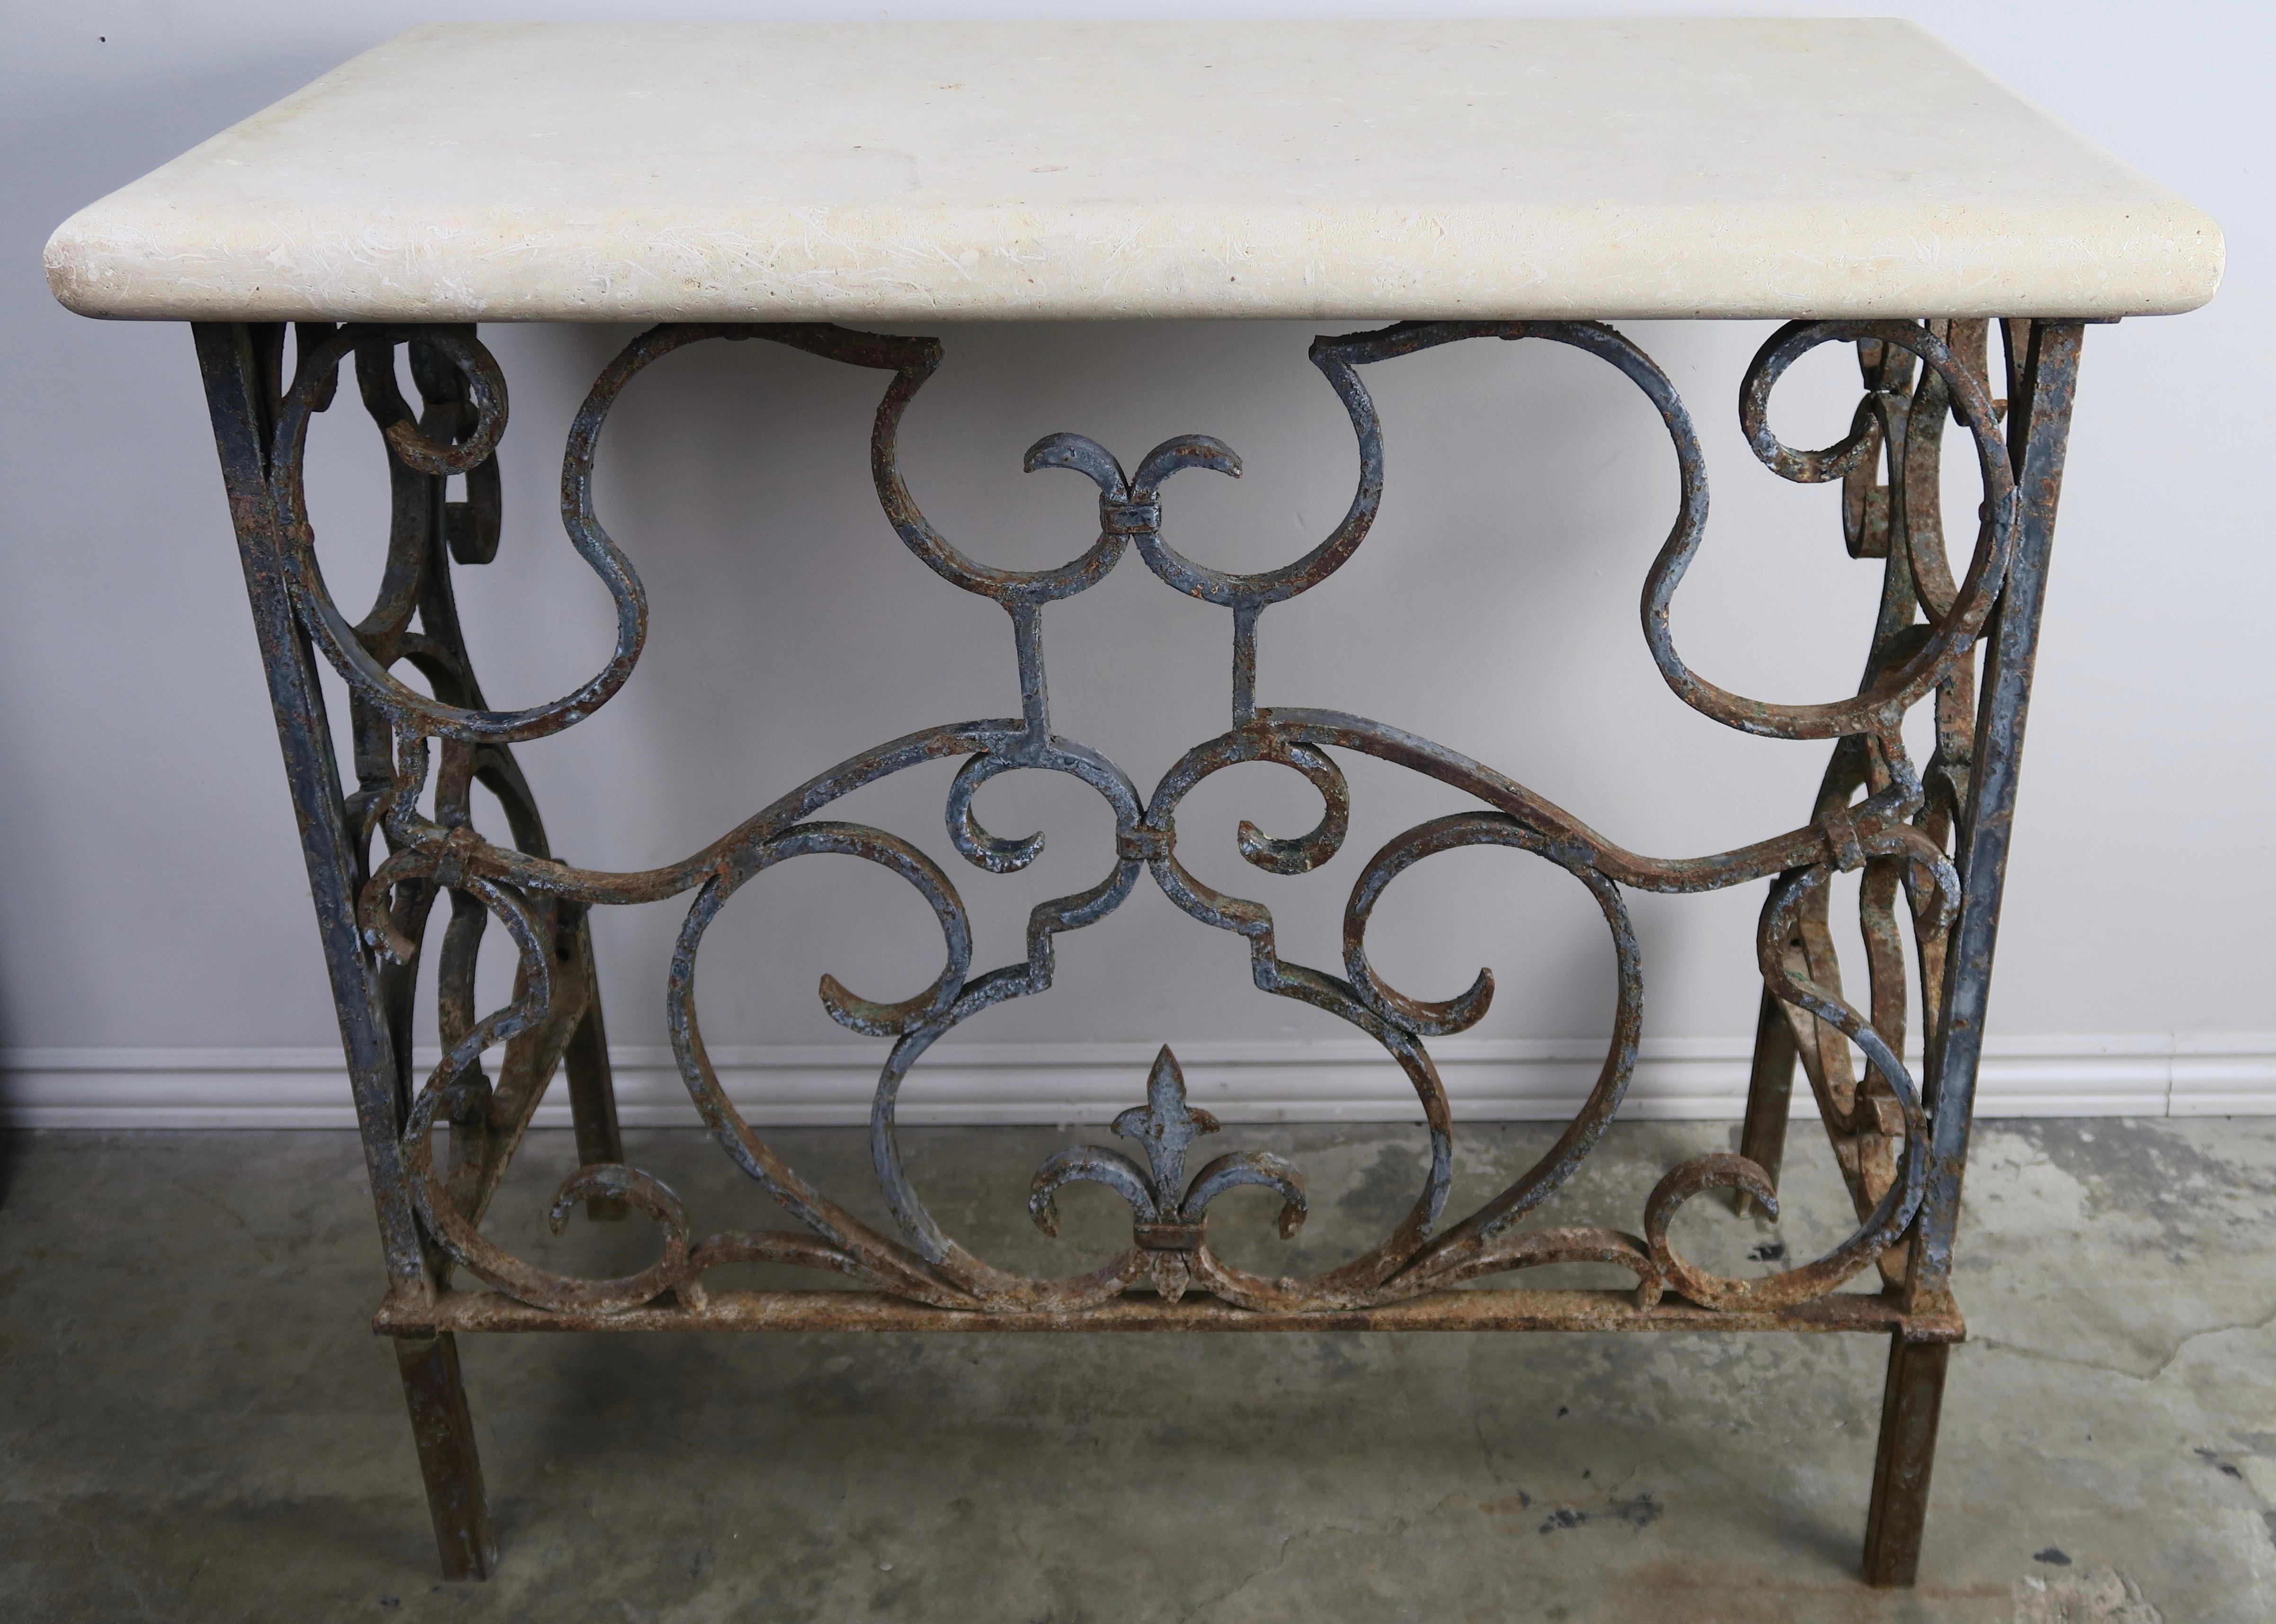 19th century handwrought iron console base that supports a travertine top. Remnants of original paint can be seen throughout.